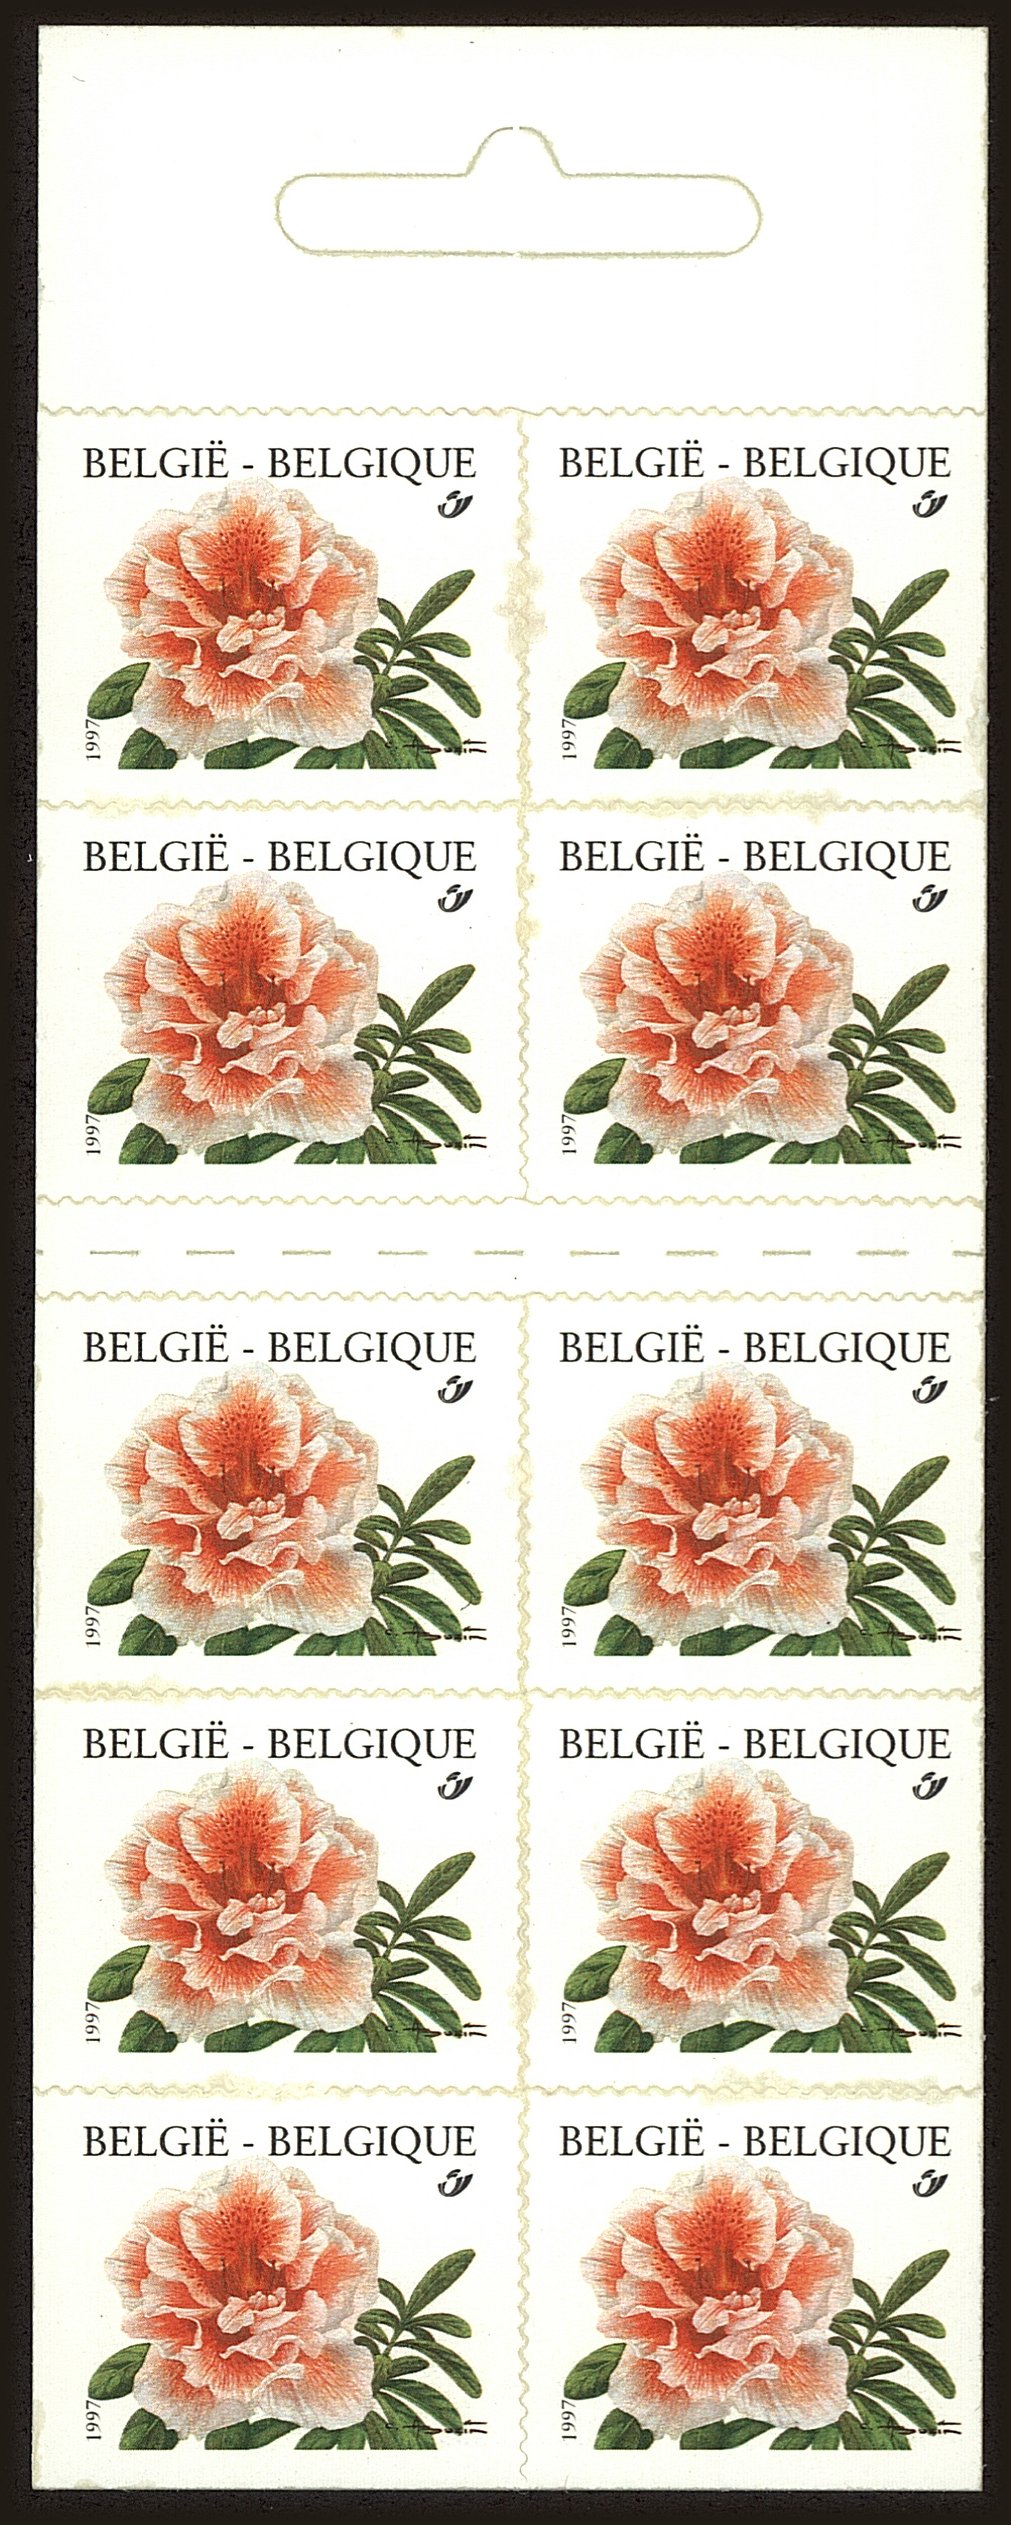 Front view of Belgium 1677a collectors stamp